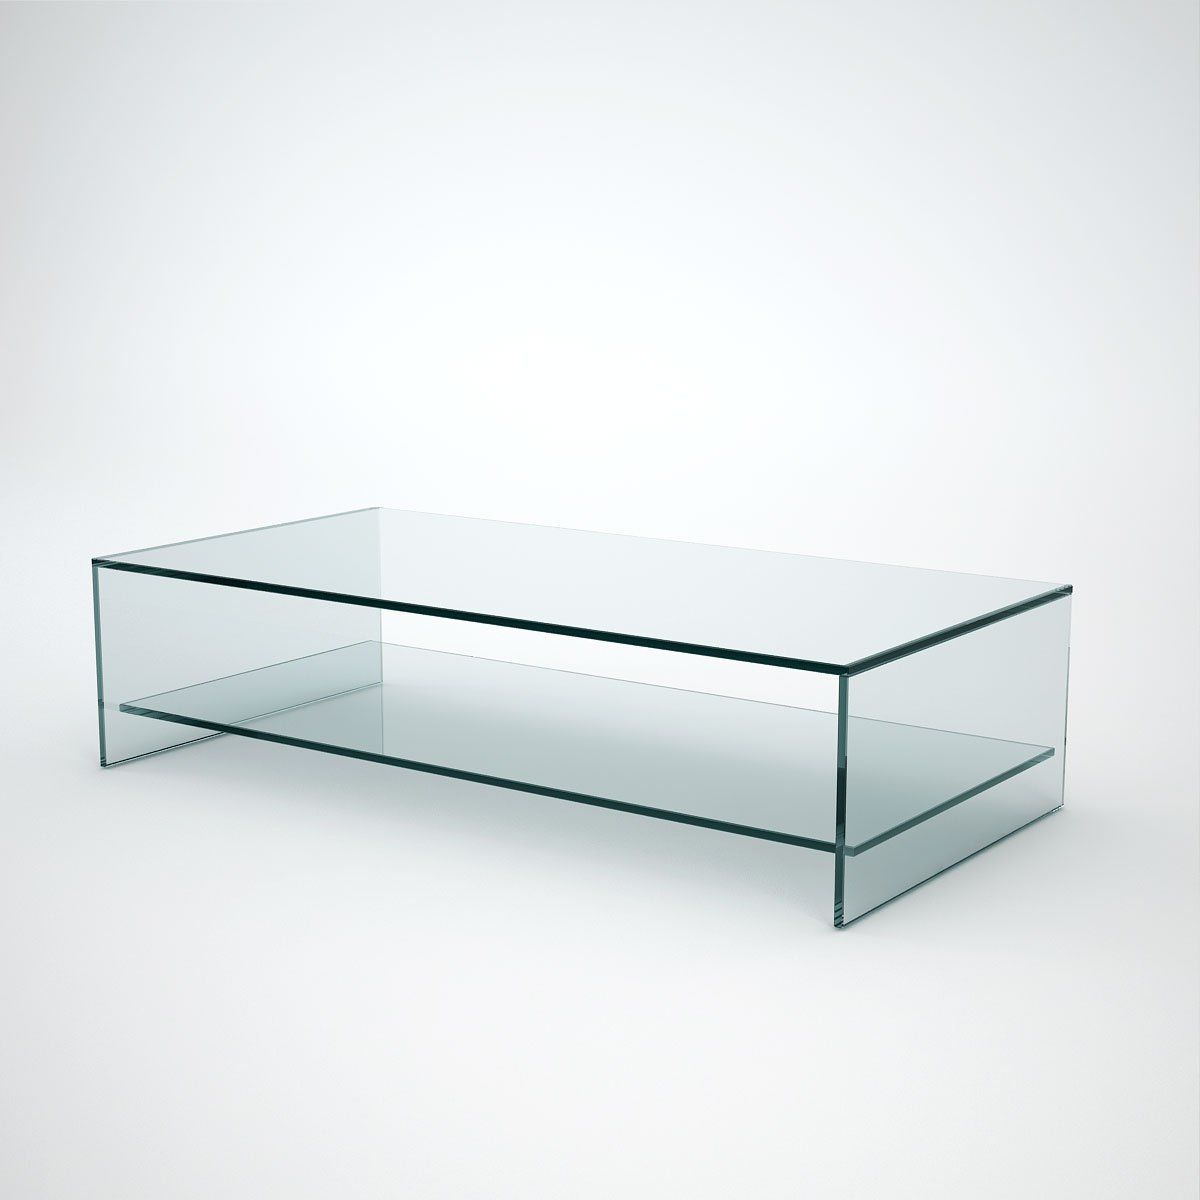 Preferred Glass Coffee Tables With Lower Shelves In Judd – Rectangle Glass Coffee Table With Shelf – Klarity – Glass Furniture (View 7 of 15)